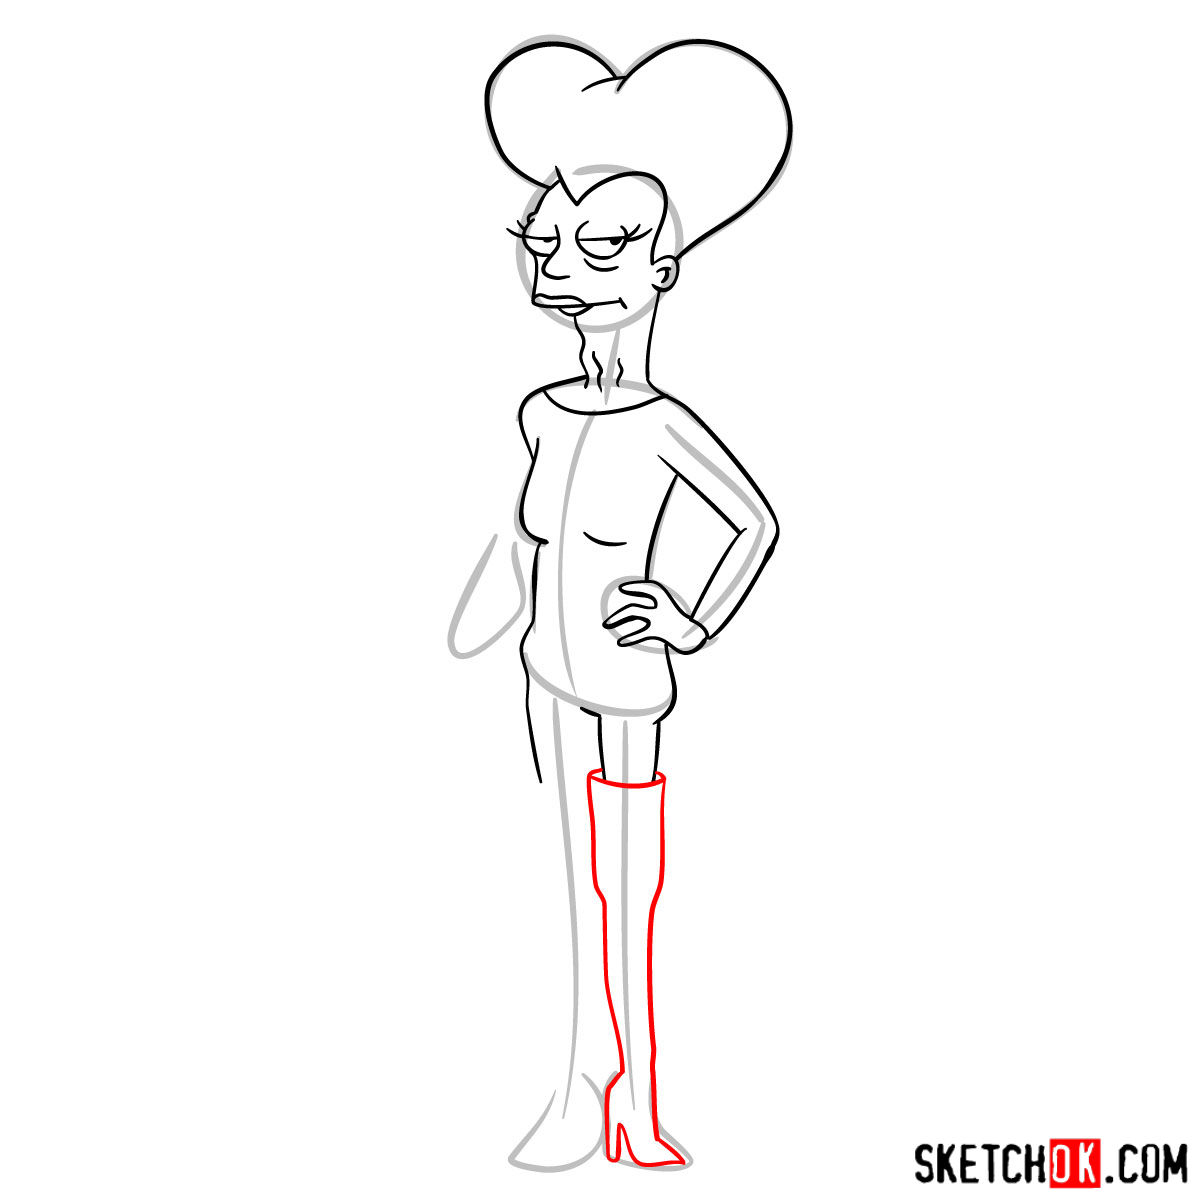 How to draw Mom from Futurama - step 09